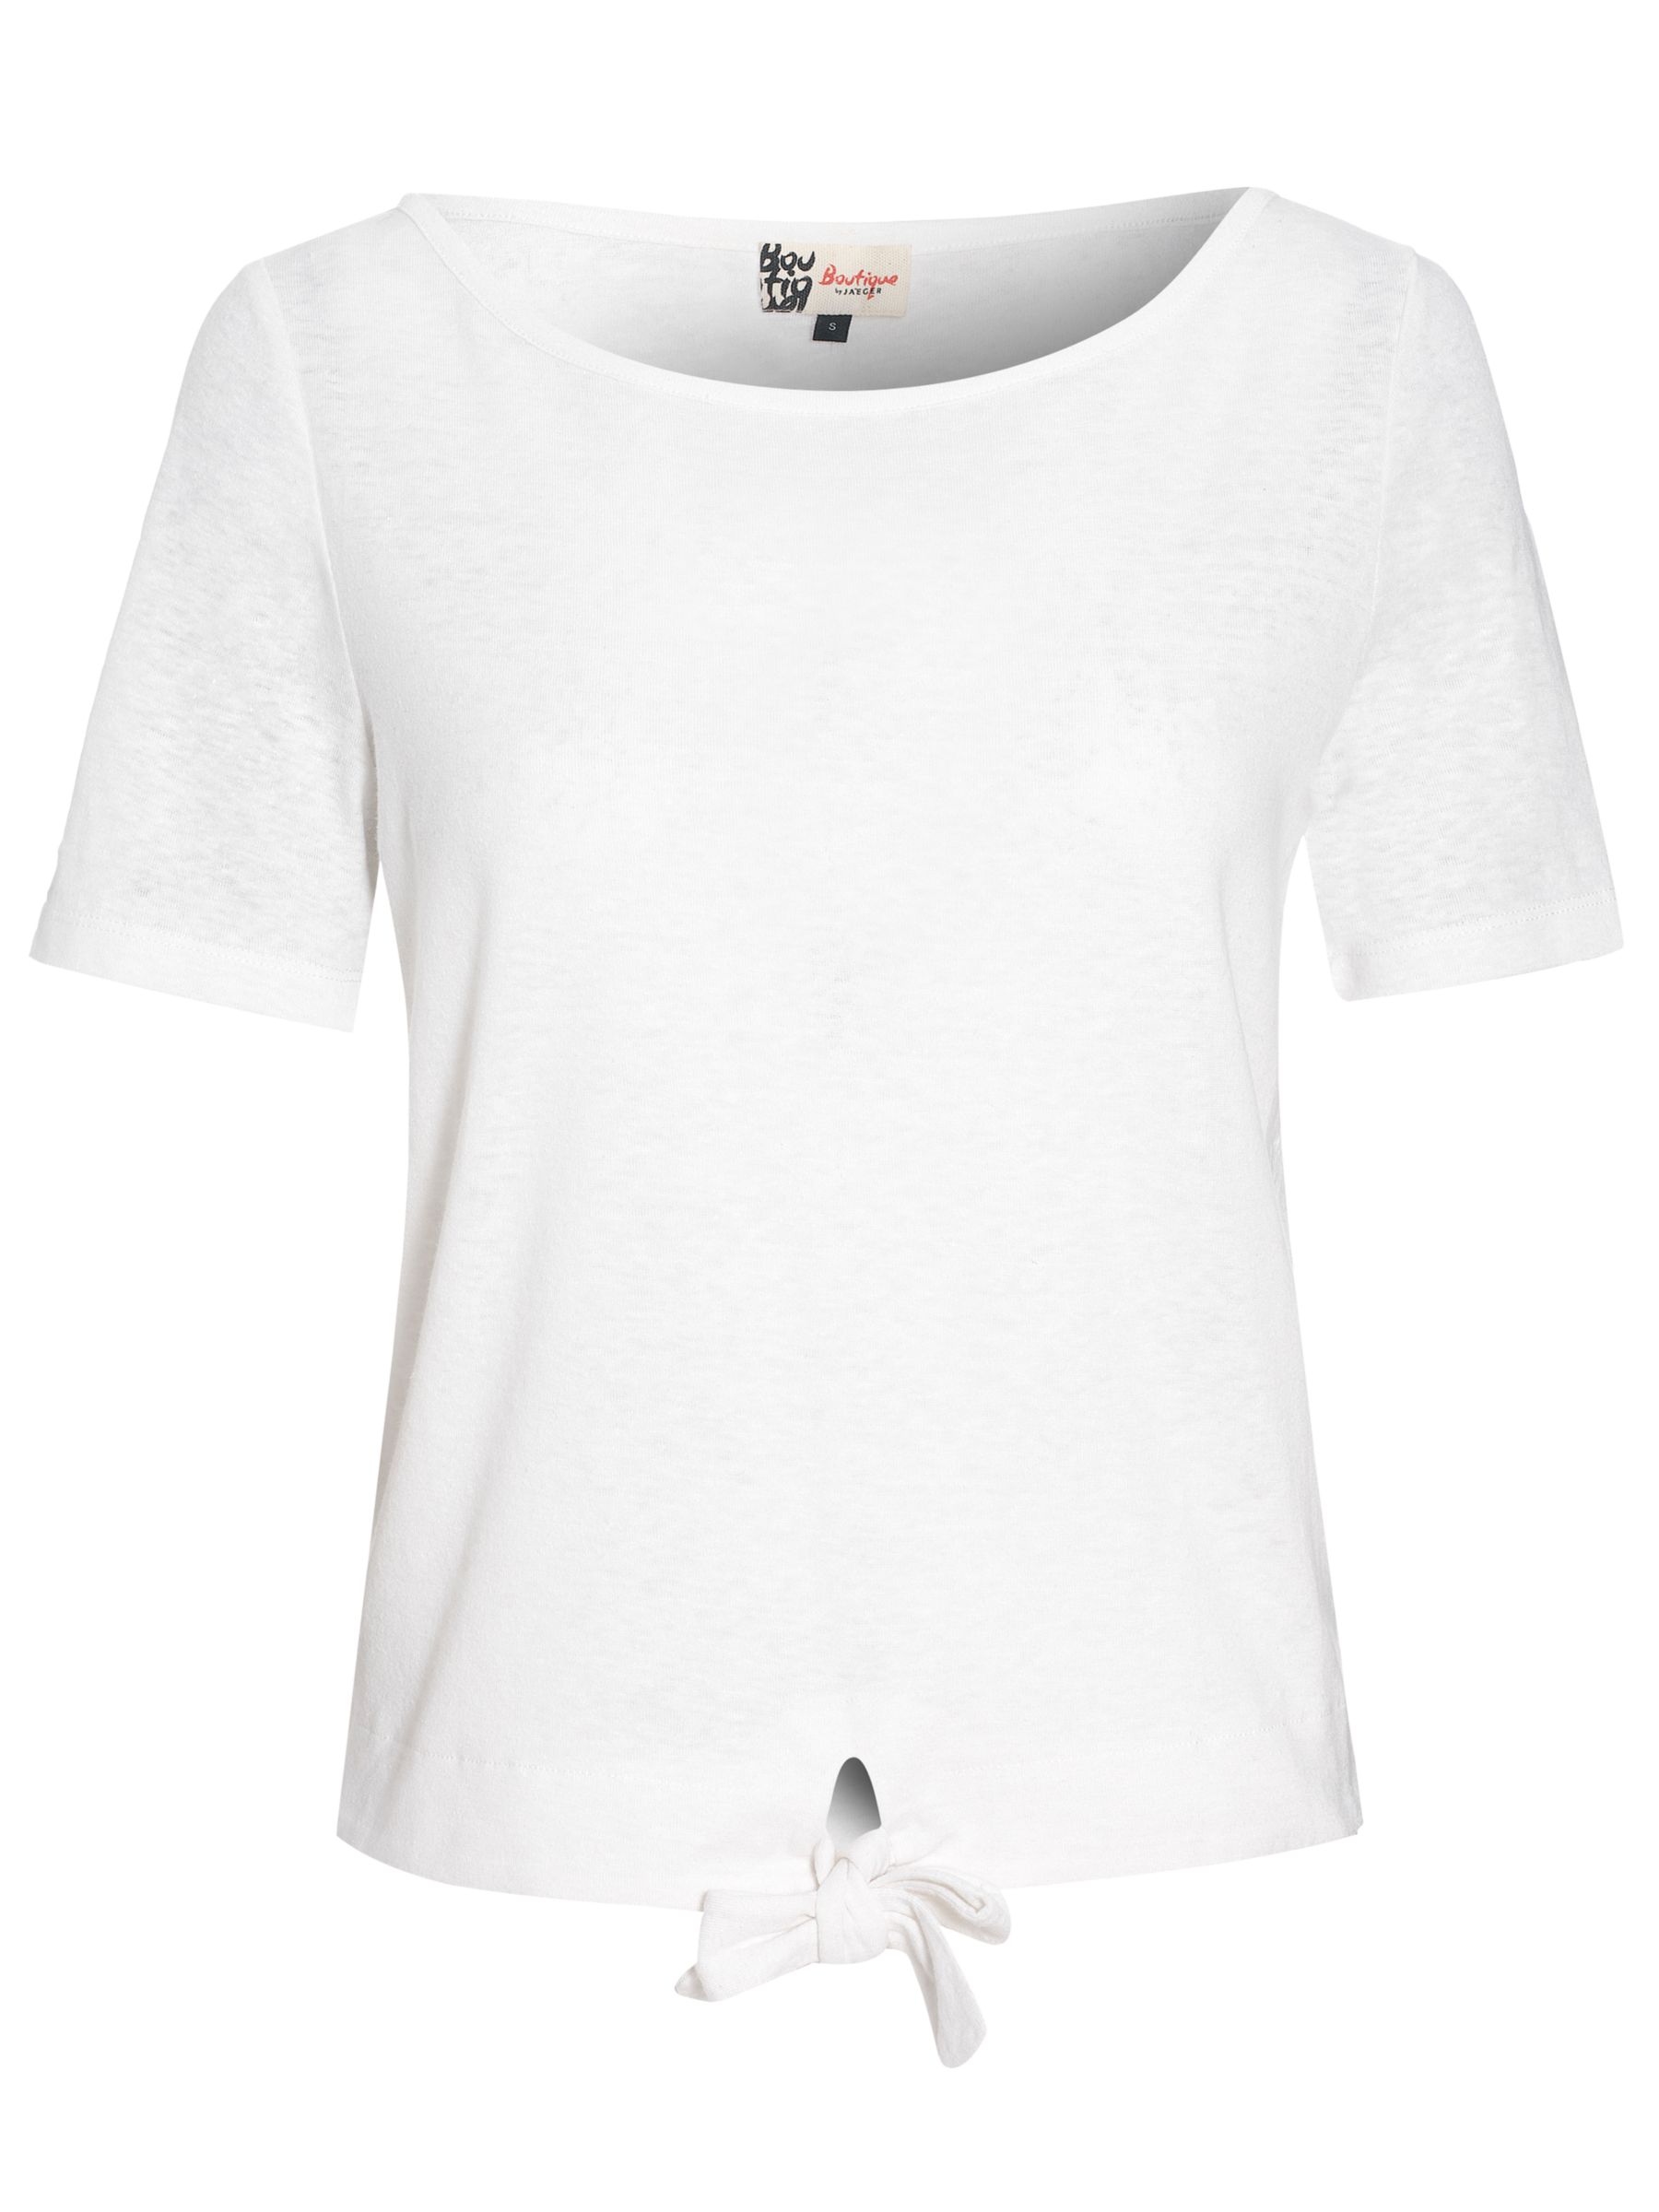 Knotted T-Shirt, White